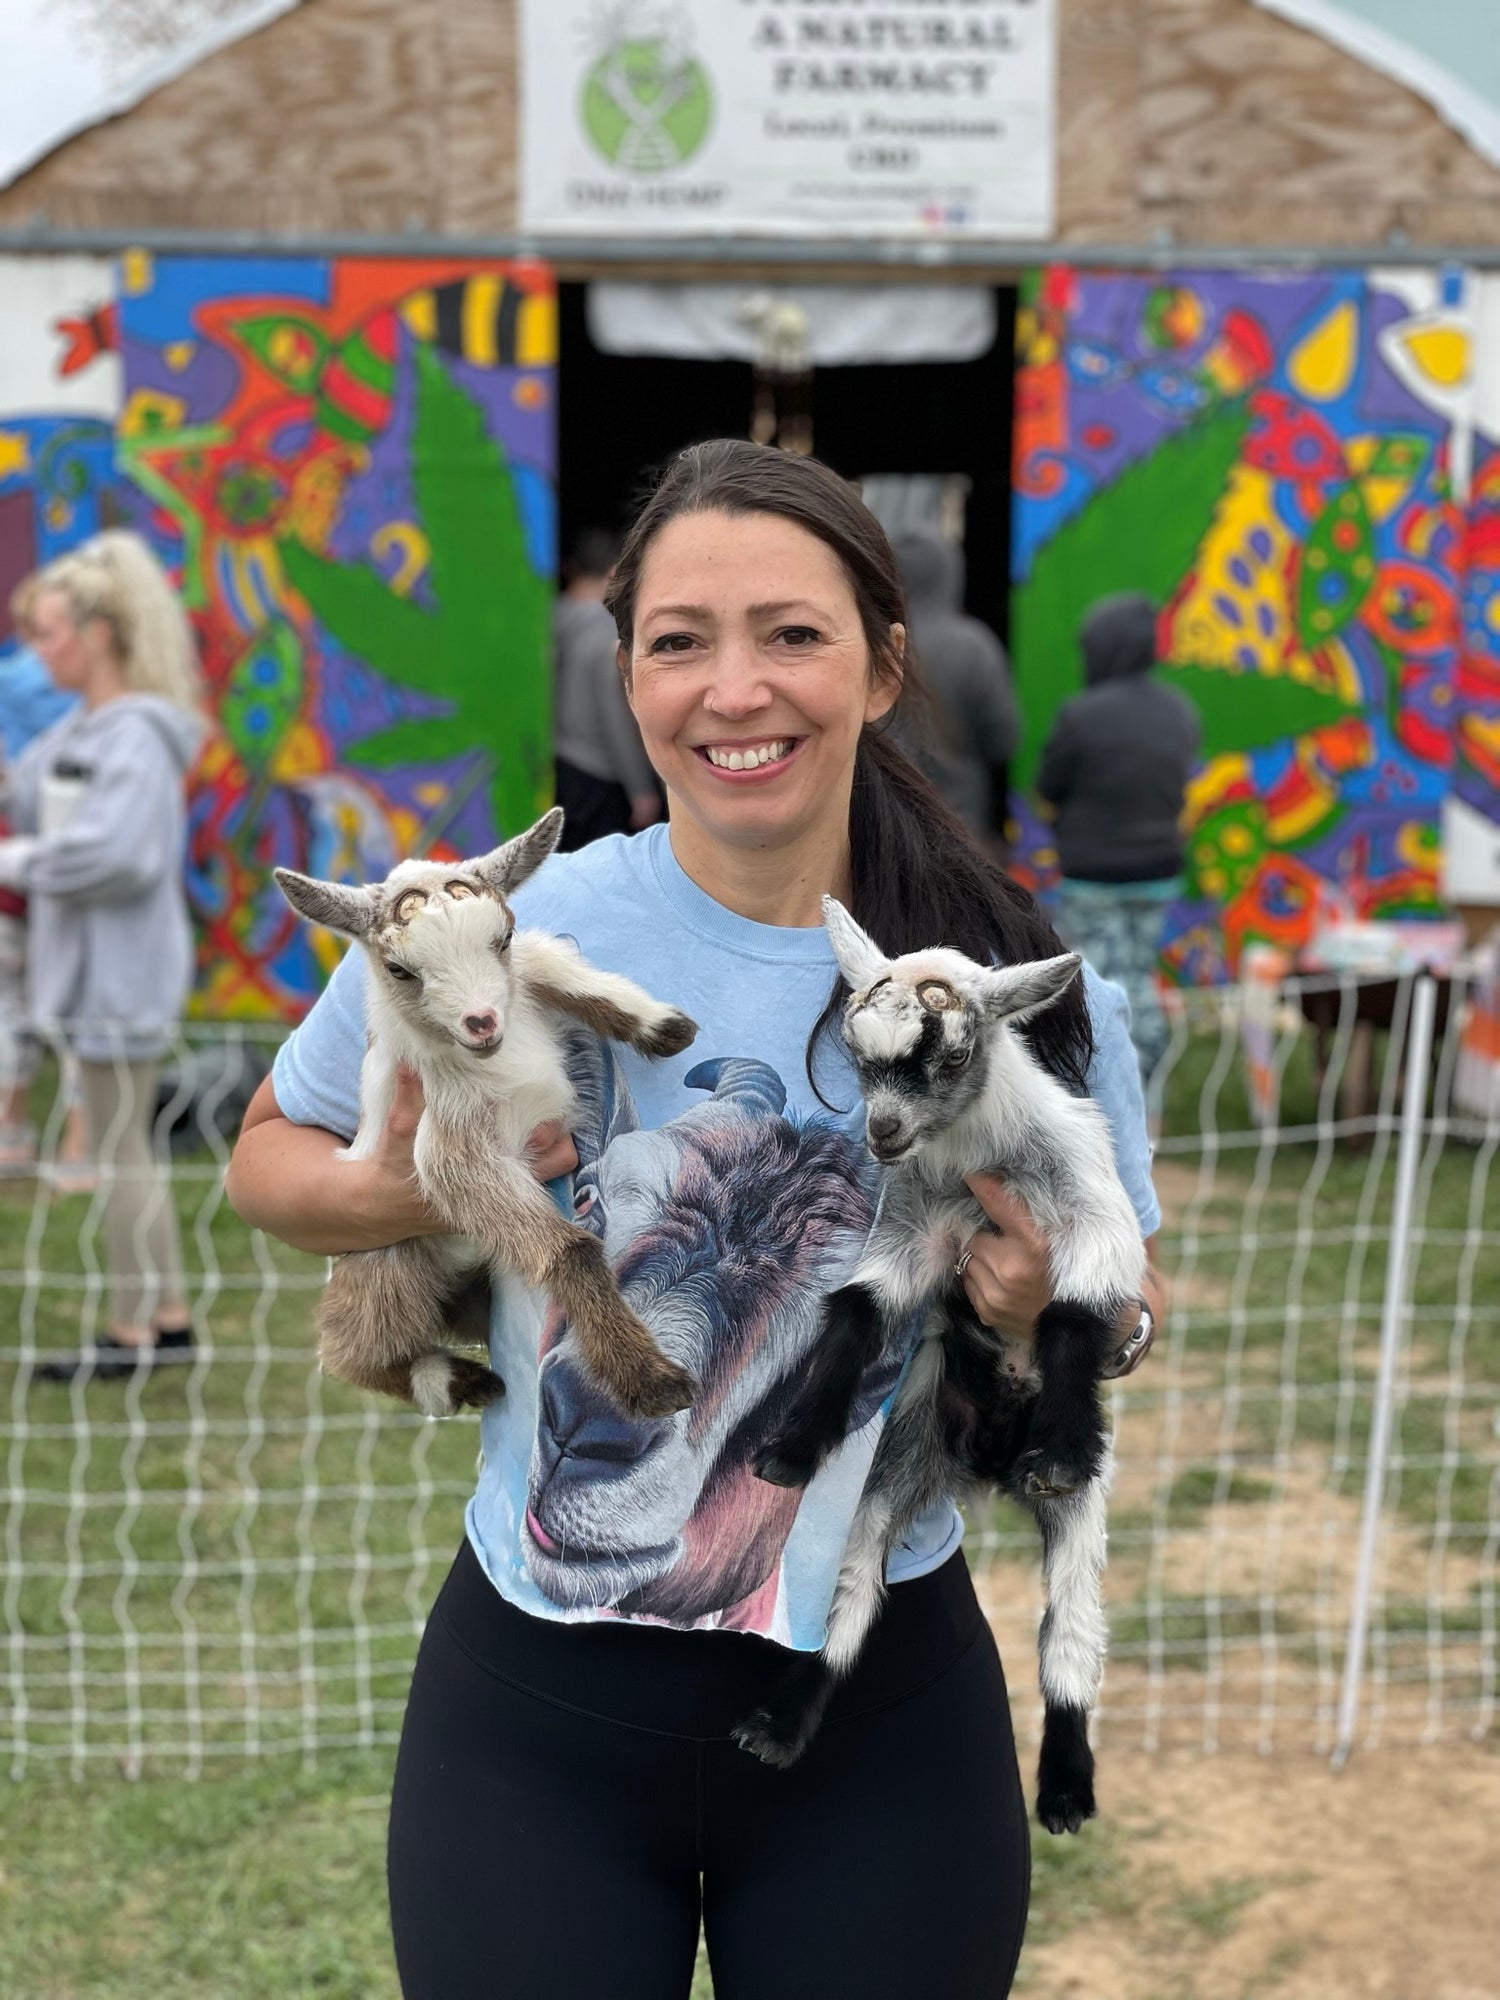 Fela from Blue Luna Yoga and Wellness holding baby goats